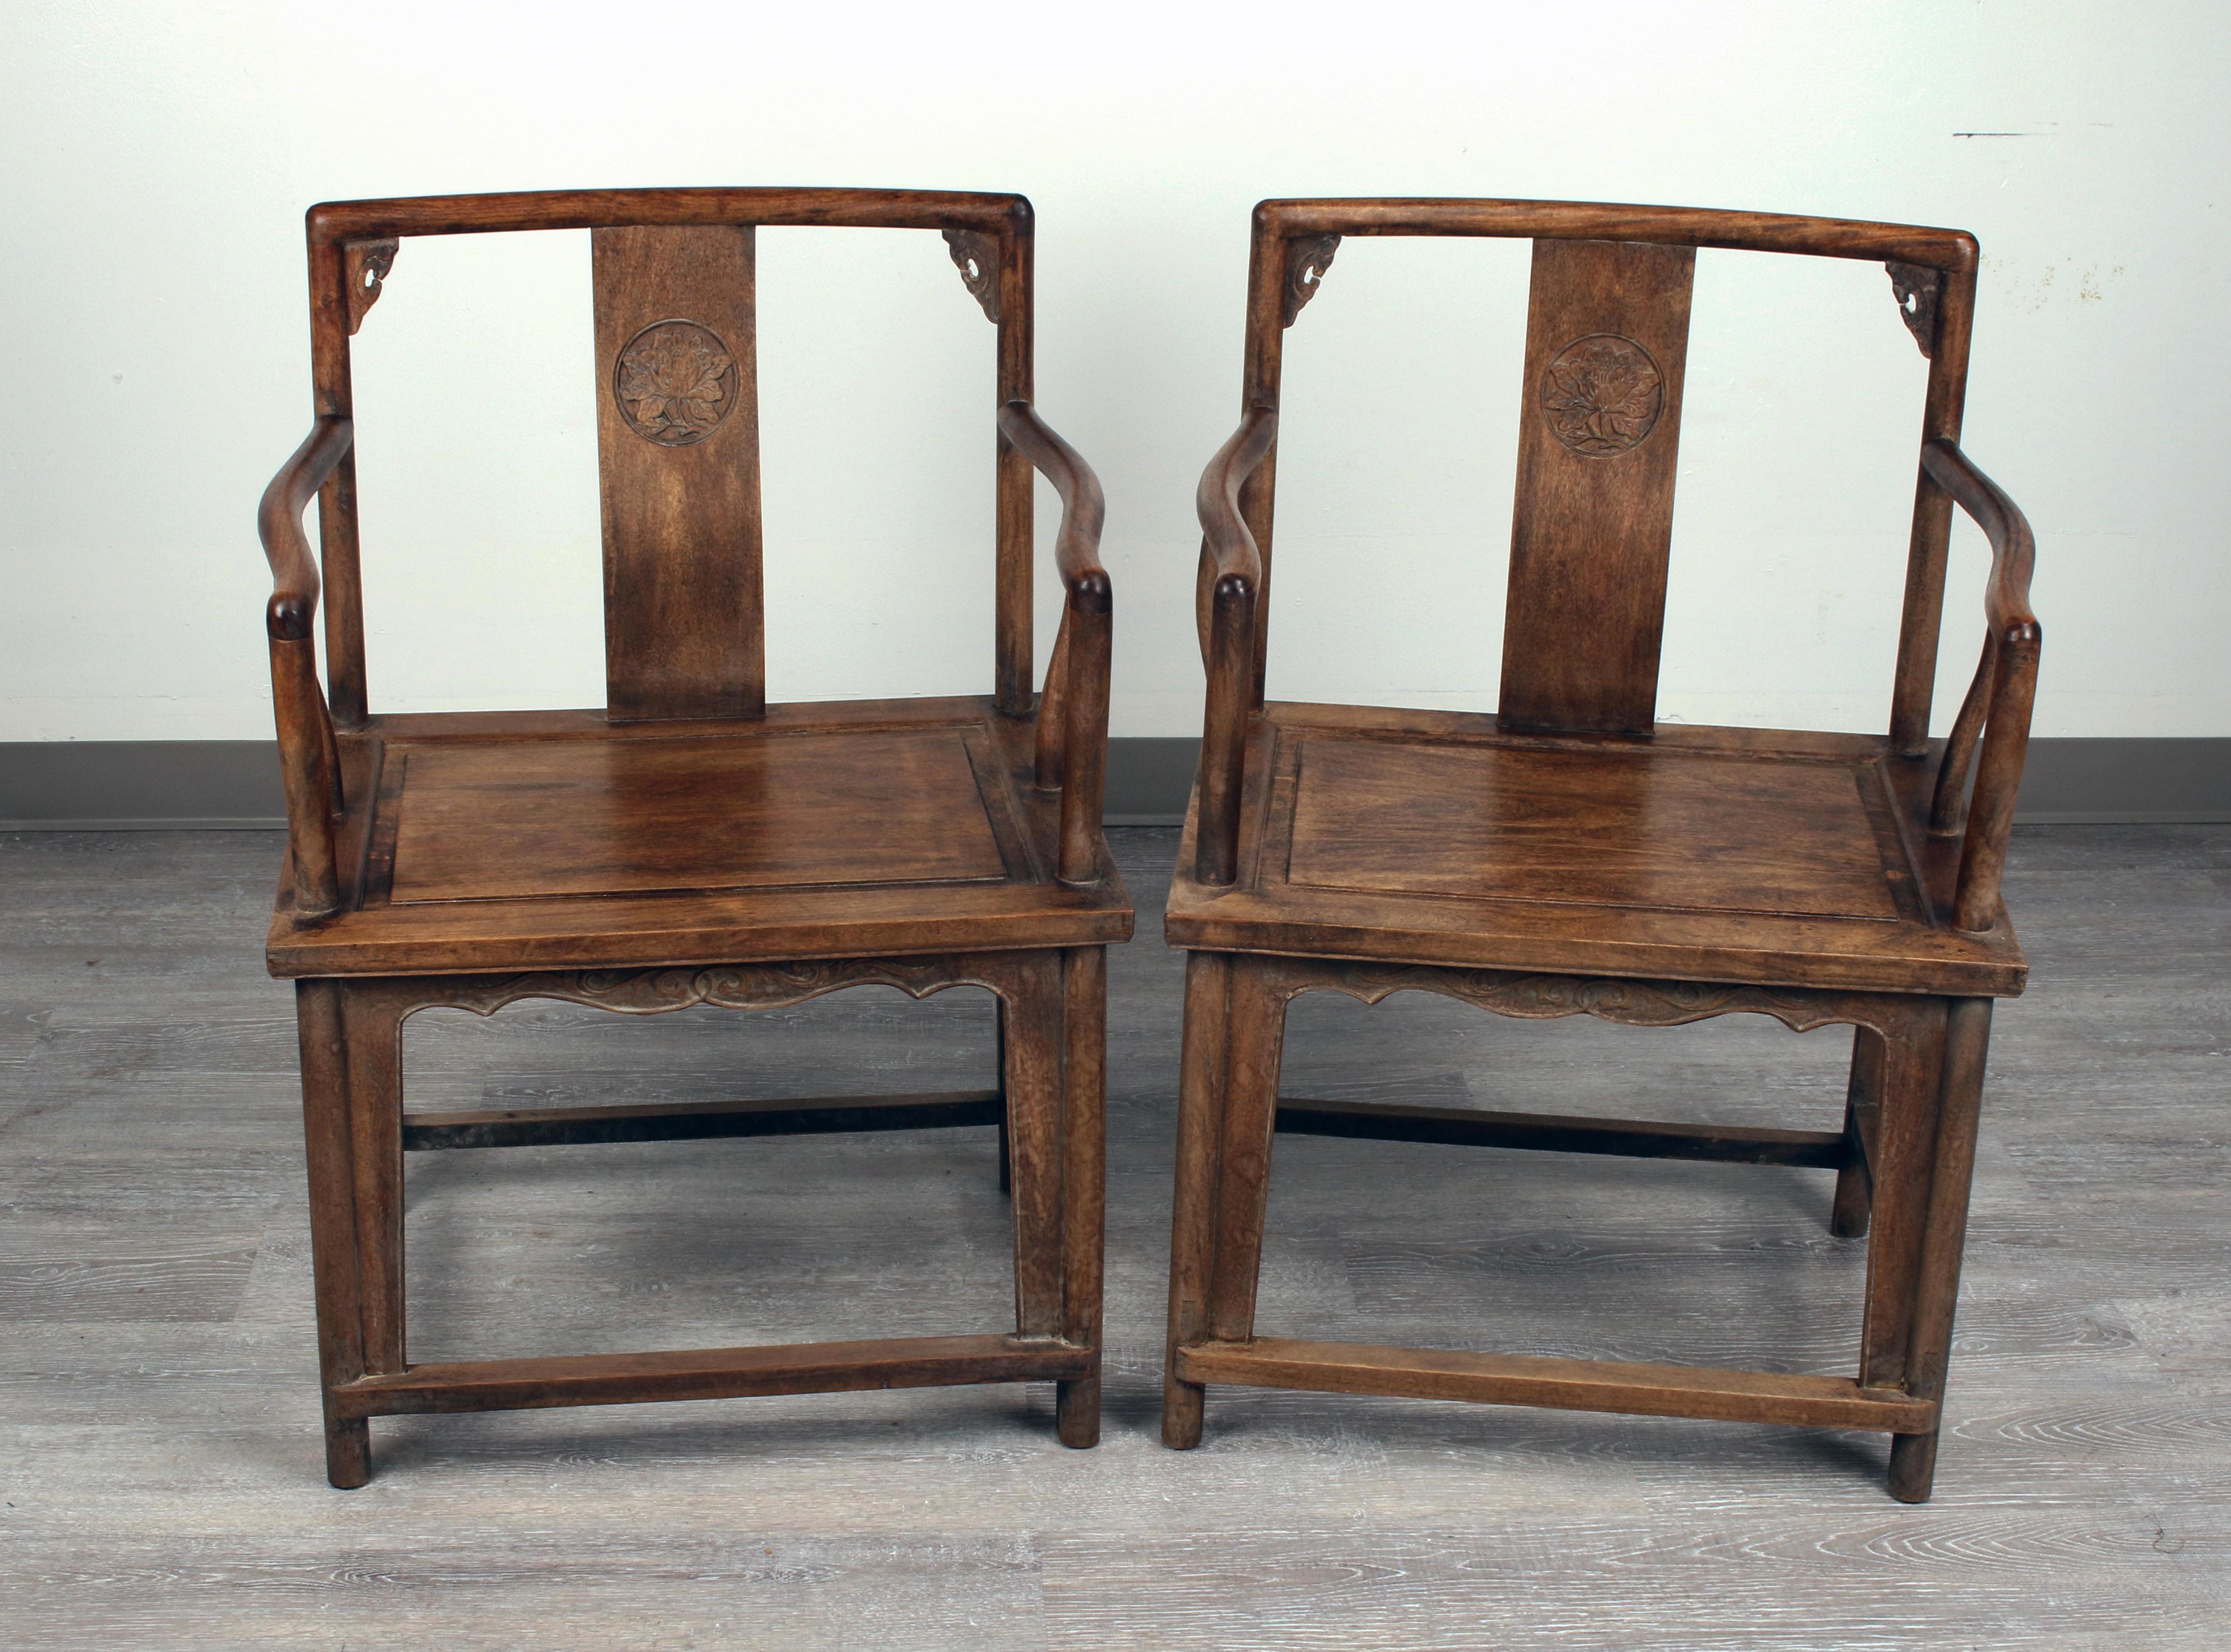 Pair of Chinese Huanghuali arm chairs and carved Floral Medallion on the center of the backsplat, and with gracefully curved arms having a rich natural patina and distinctive grain.
They were made by hand with no nails, very sturdy and firm, supper